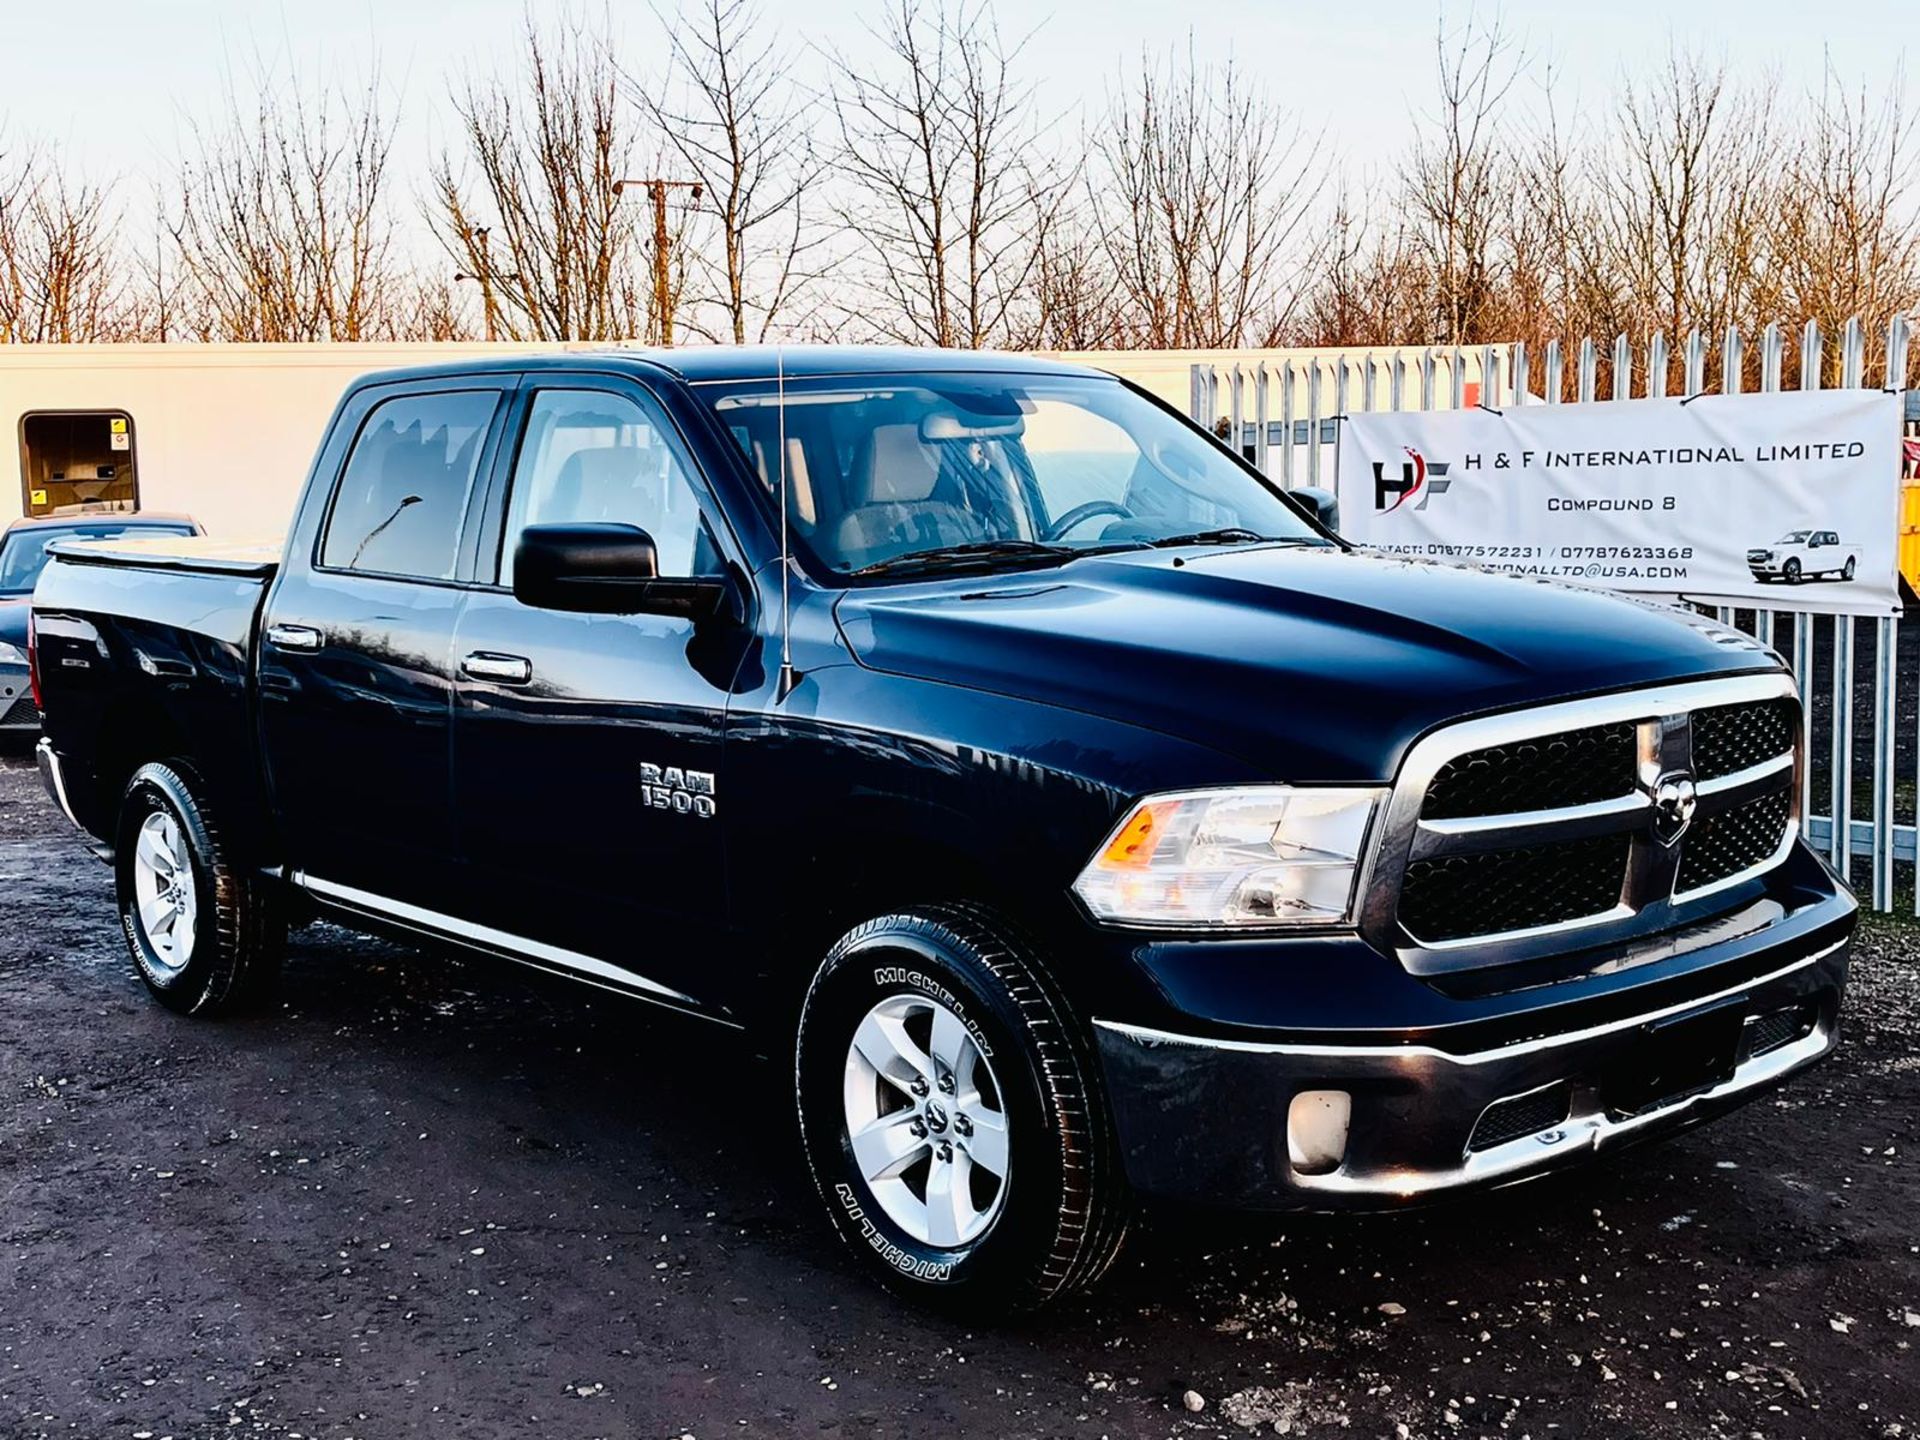 ** ON SALE ** Dodge Ram 3.6L V6 1500 Crew Cab SLT ' 2015 Year ' A/C - 6 Seats - Chrome Package - Image 3 of 31